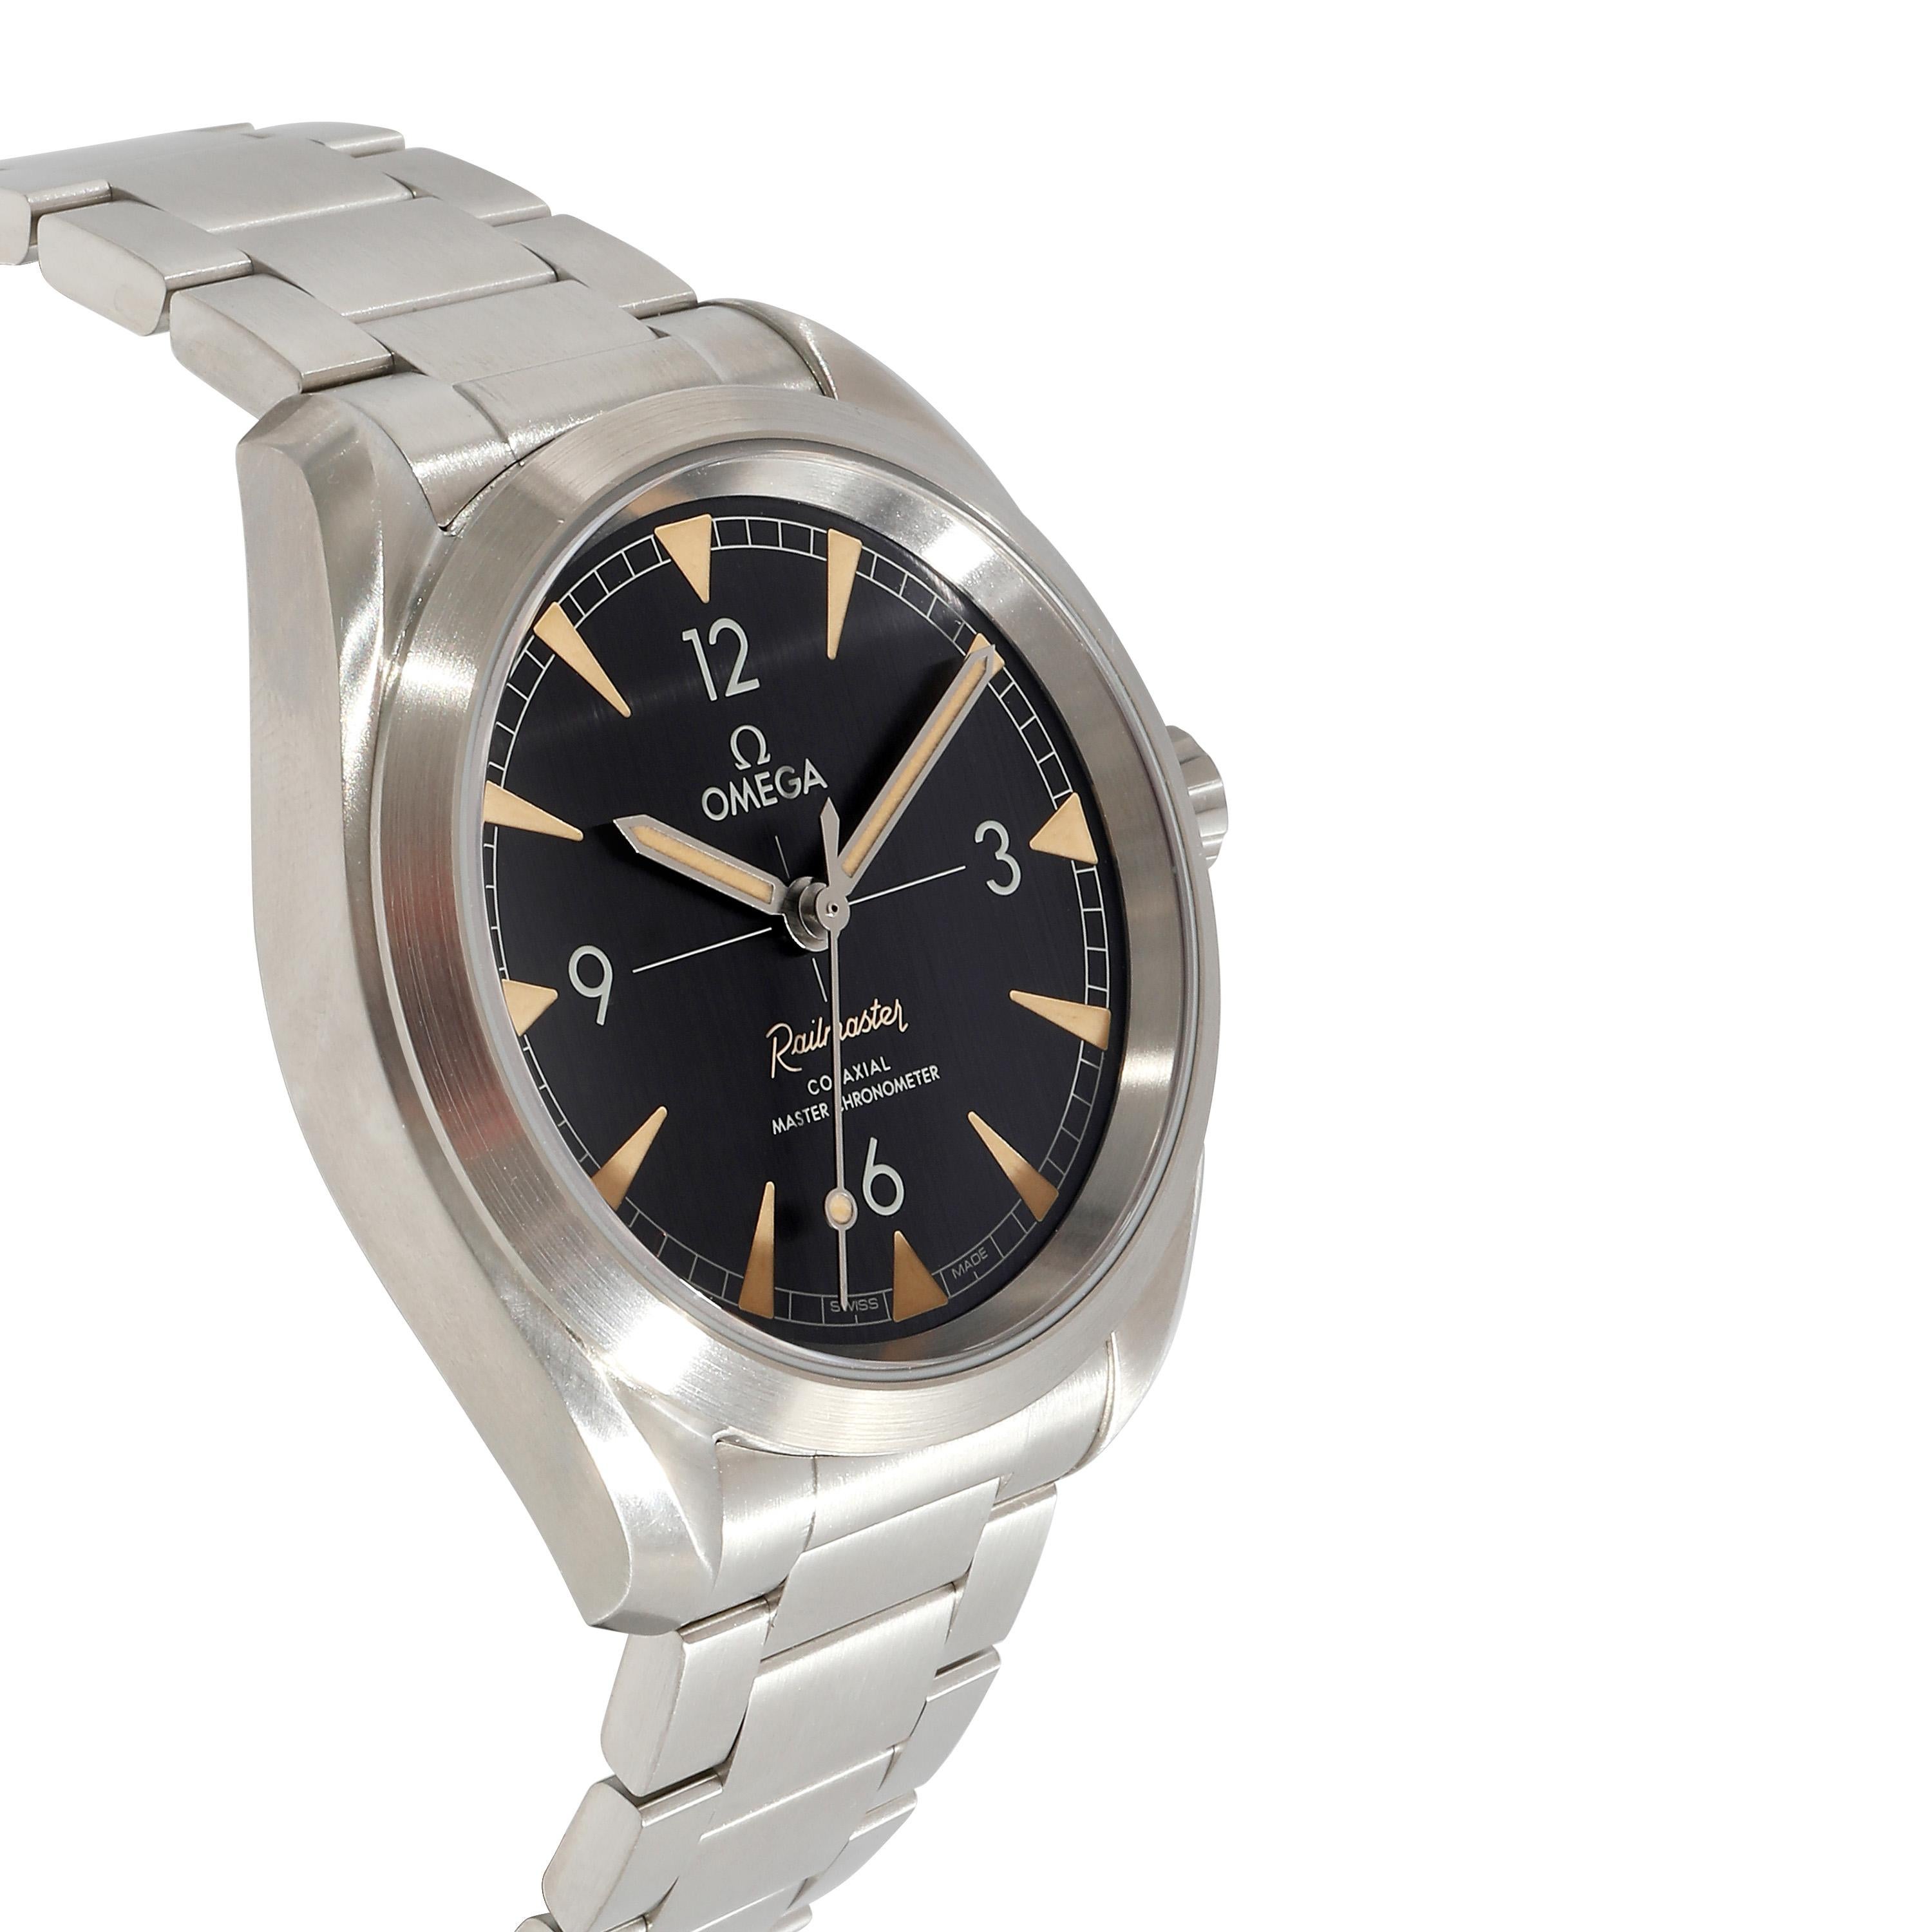 Omega Railmaster 220.10.40.20.01.001 Men's Watch in  Stainless Steel

SKU: 132497

PRIMARY DETAILS
Brand: Omega
Model: Railmaster
Country of Origin: Switzerland
Movement Type: Mechanical: Automatic/Kinetic
Year of Manufacture: 2020-2029
Condition: